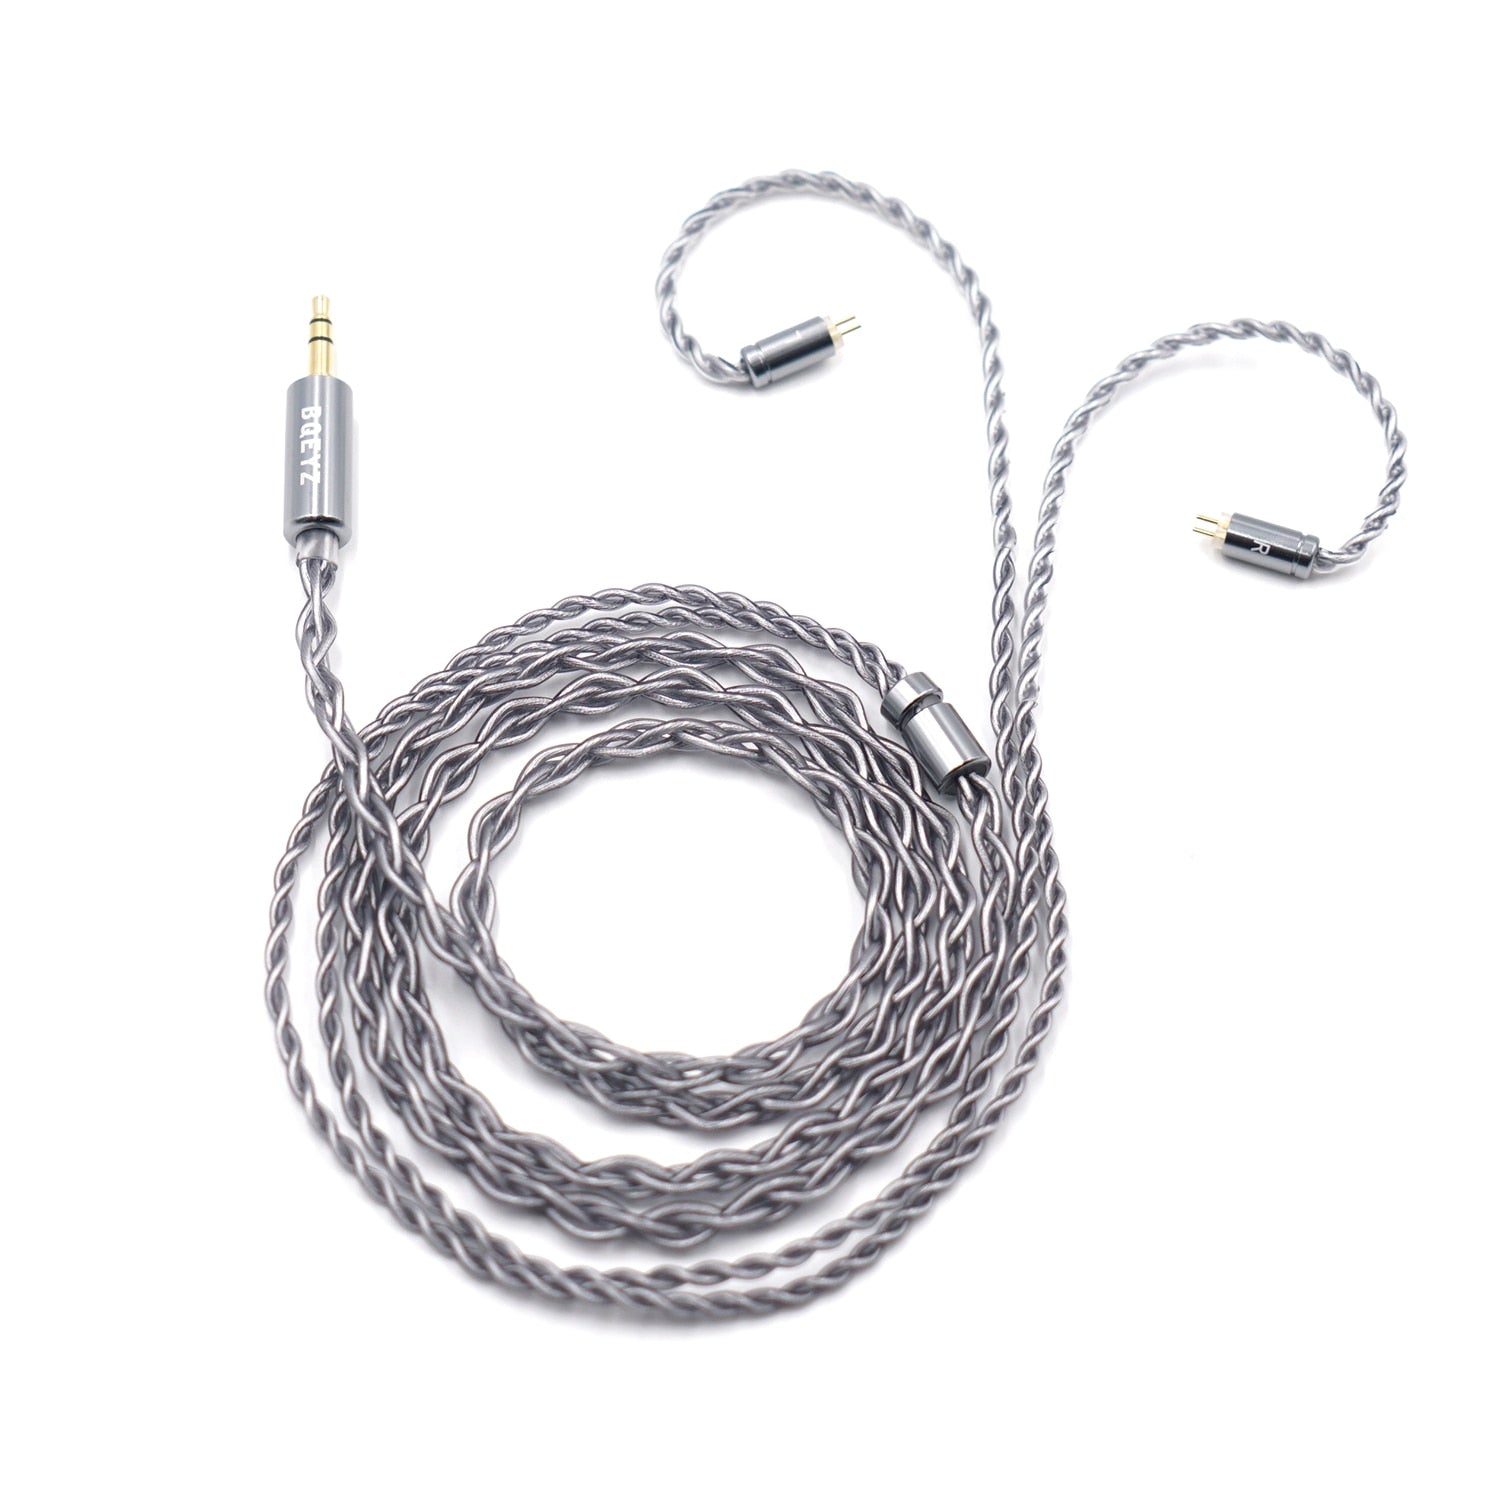 BQEYZ Winter Upgraded Cable Rime 0.78mm 2 Pin Single Crystal Copper Plated Silver Hybrid Earphone with Detachable Wire - The HiFi Cat